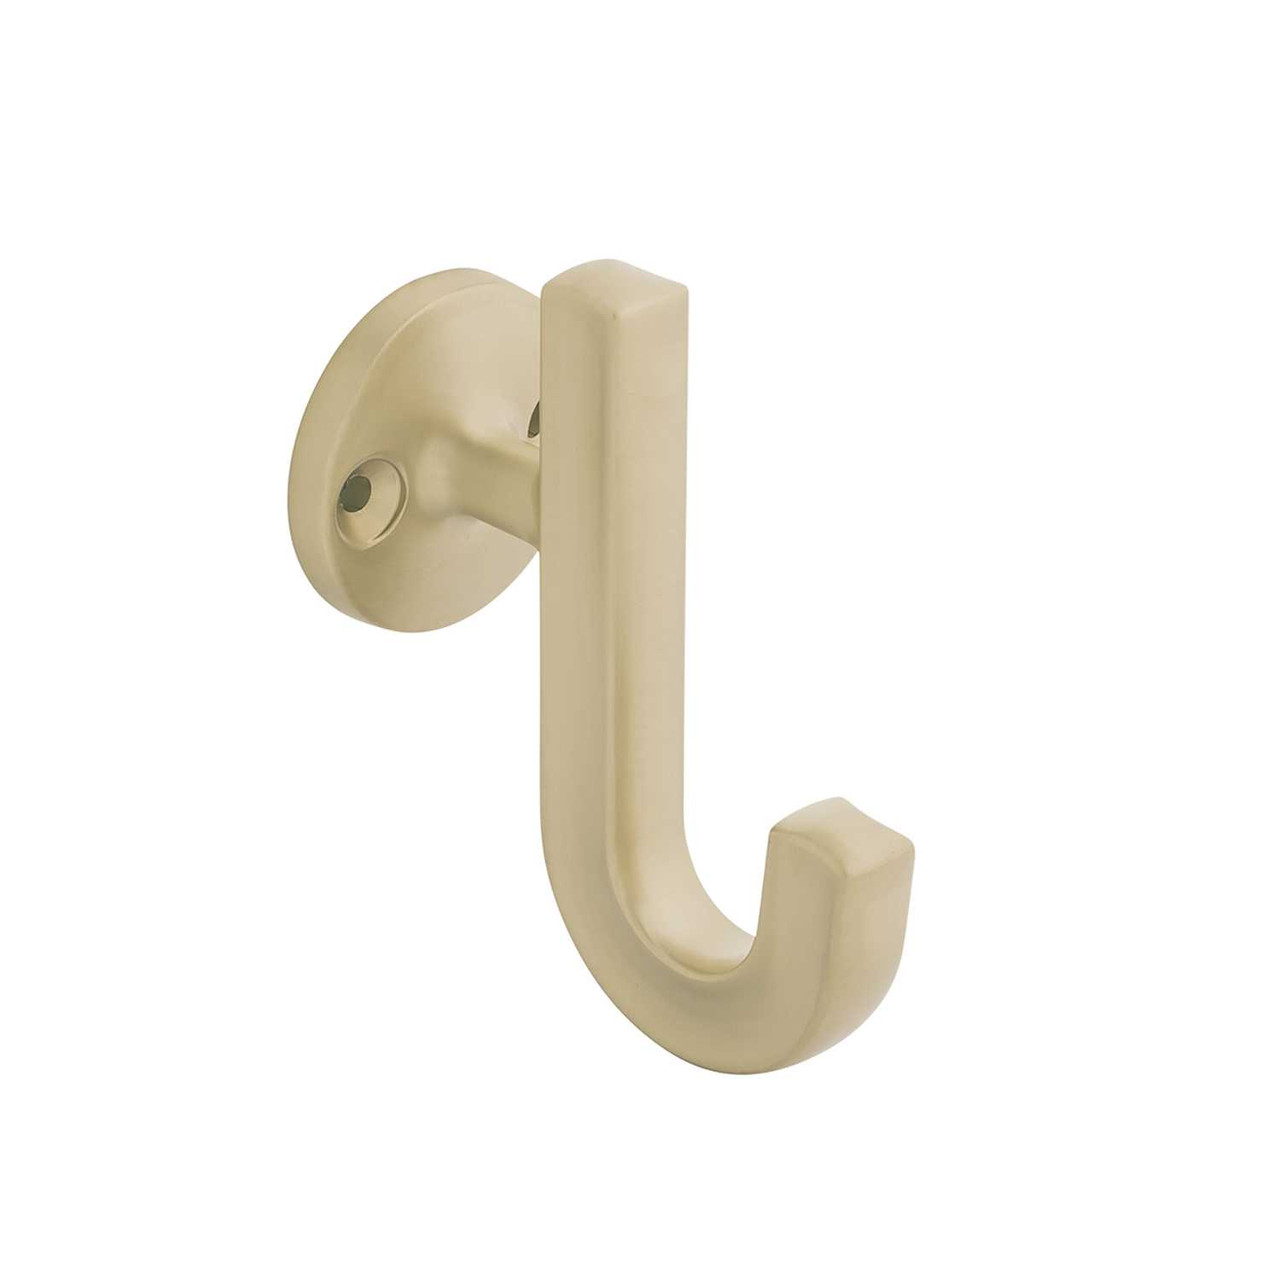 Hickory Woodward Champagne Bronze Wall Hook - The Knob Shop